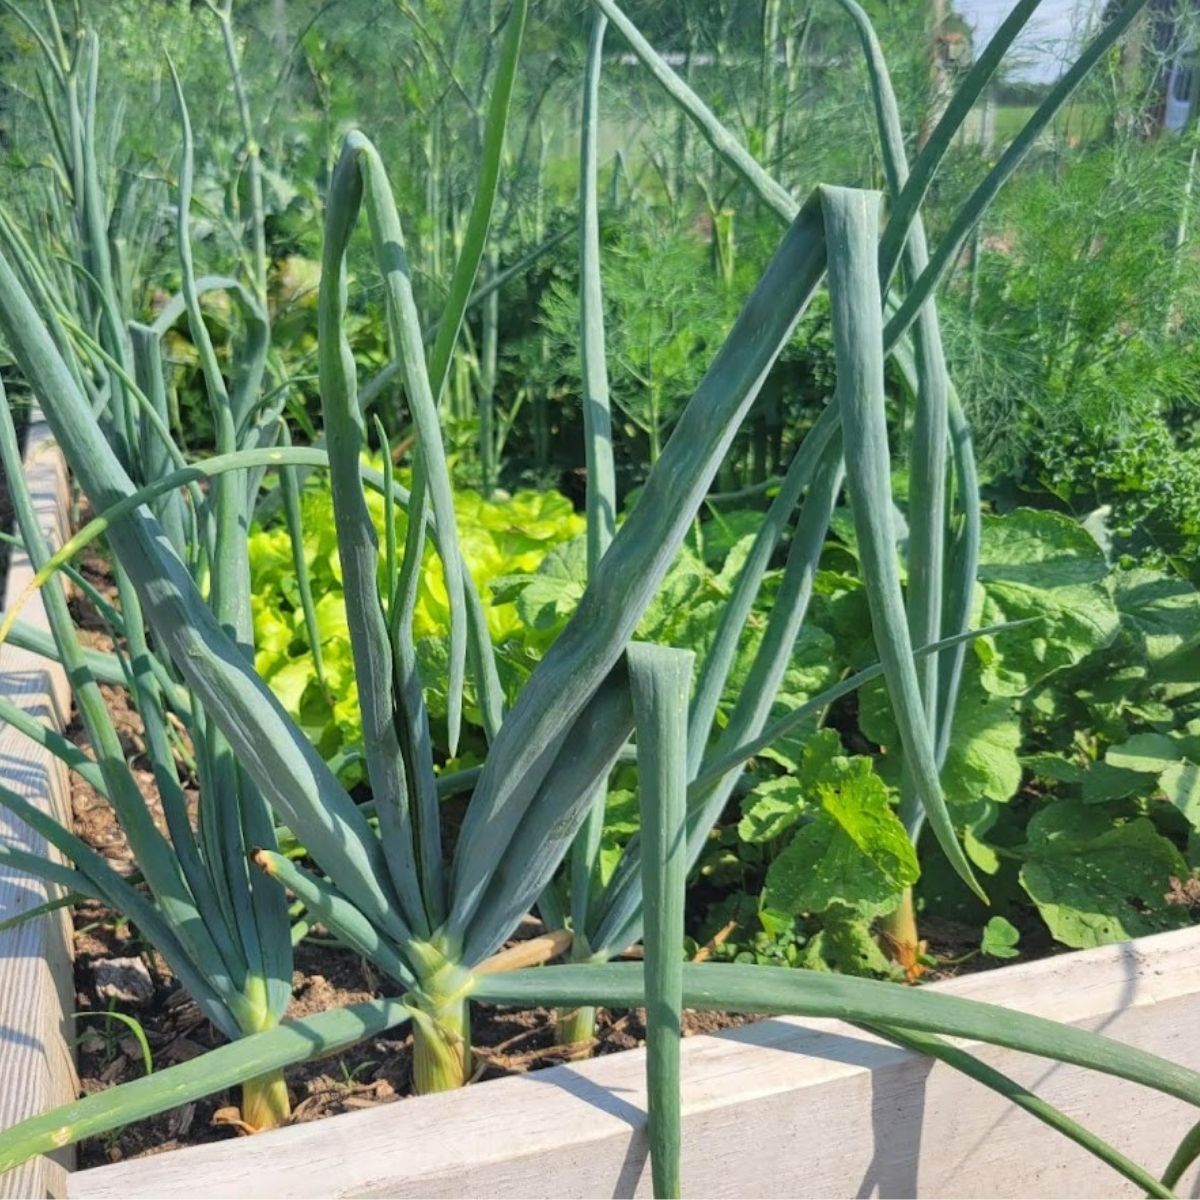 onions growing in a raised bed